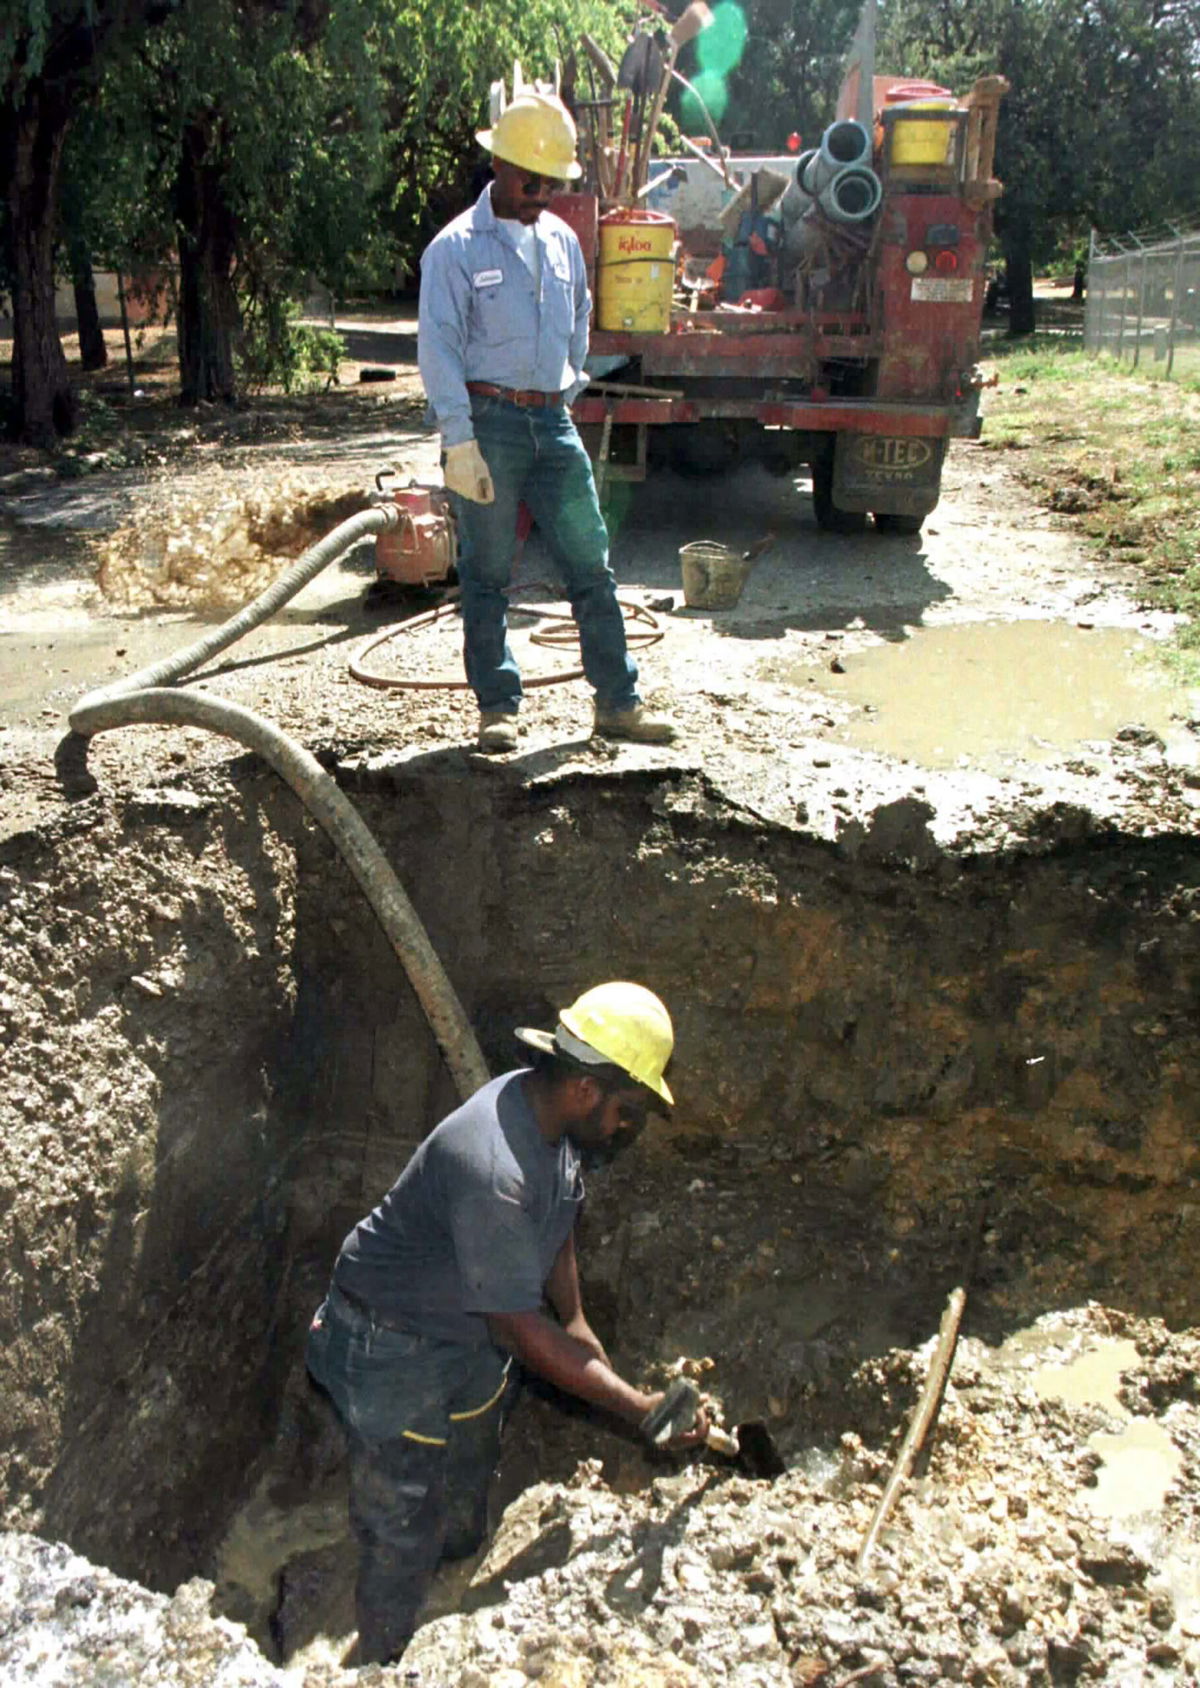 <i>Str Old/Reuters</i><br/>A construction worker digs out a hole around a broken 20-inch water main in Fort Worth